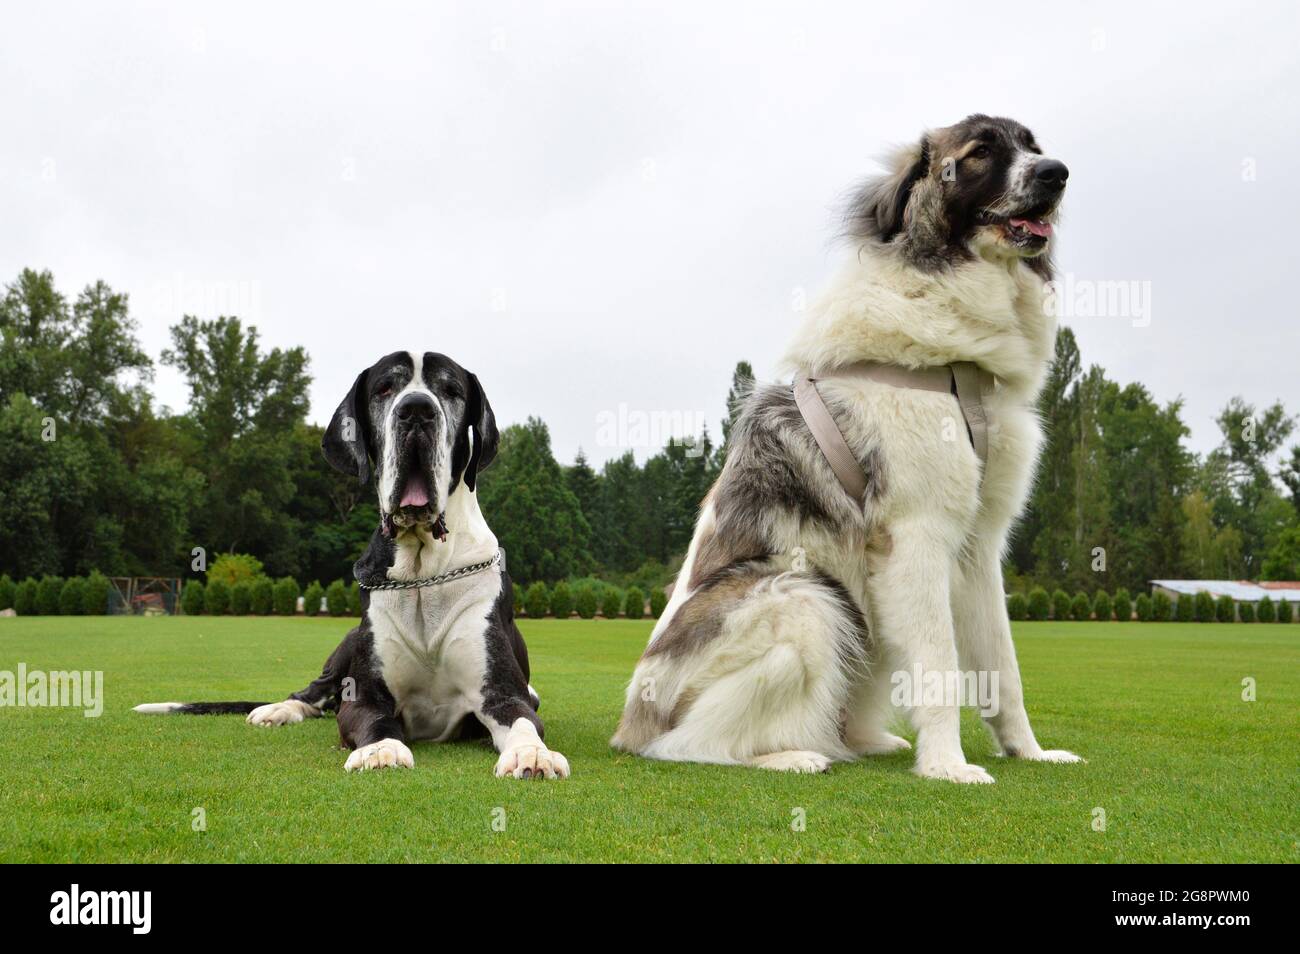 Two big dogs with a great dane and a Pyrenean Mountain dog. They are large breed dogs. Stock Photo